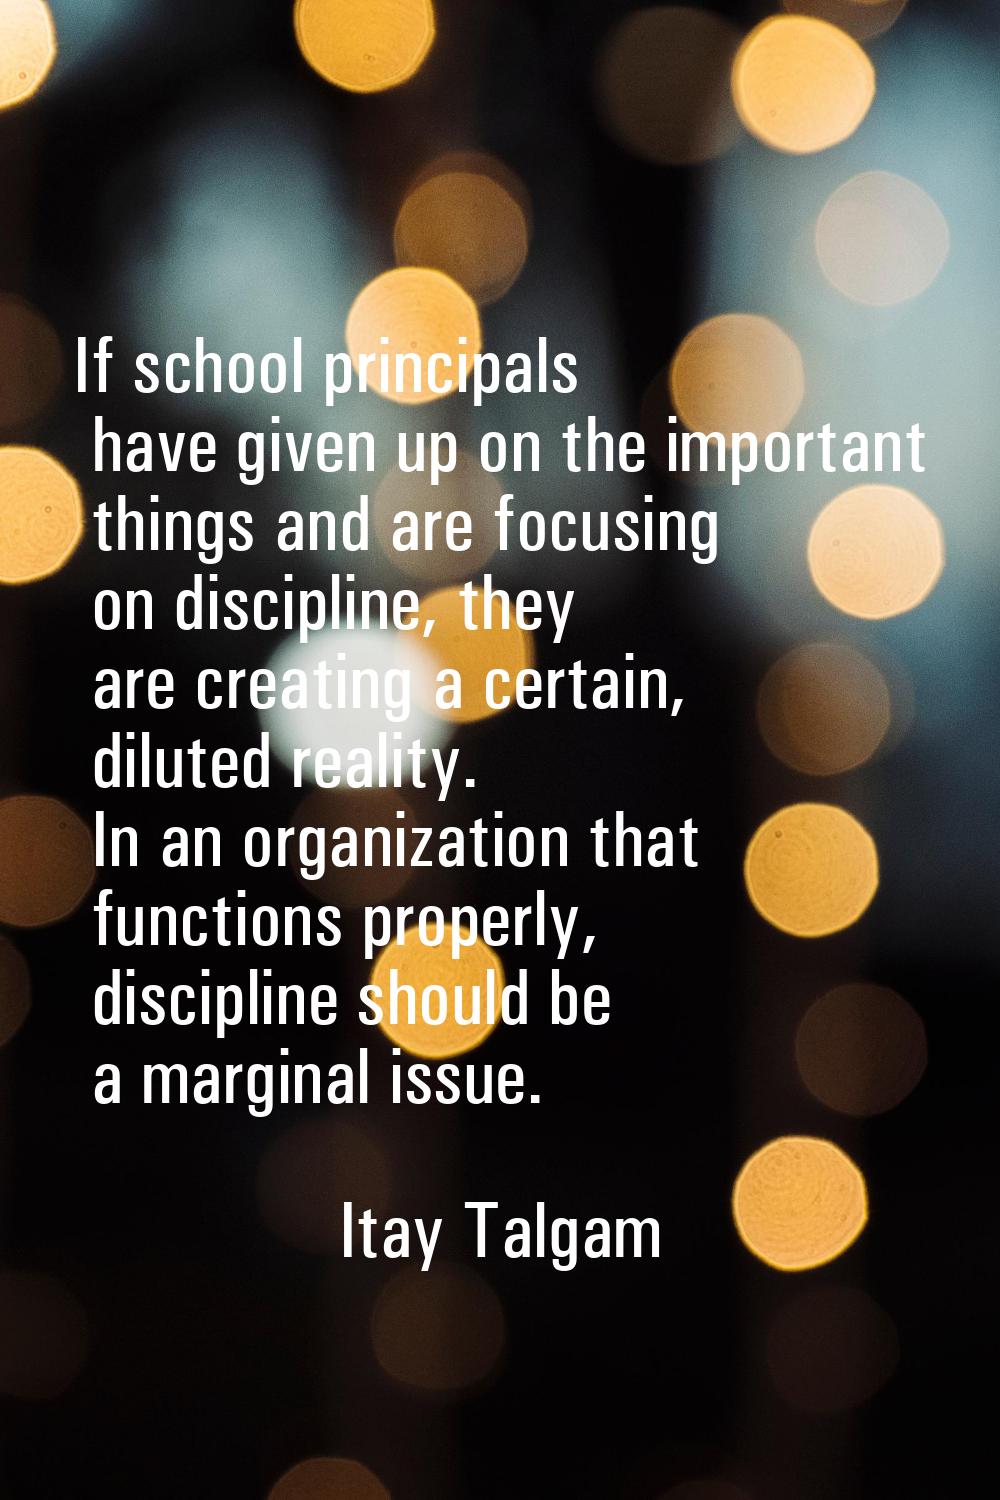 If school principals have given up on the important things and are focusing on discipline, they are